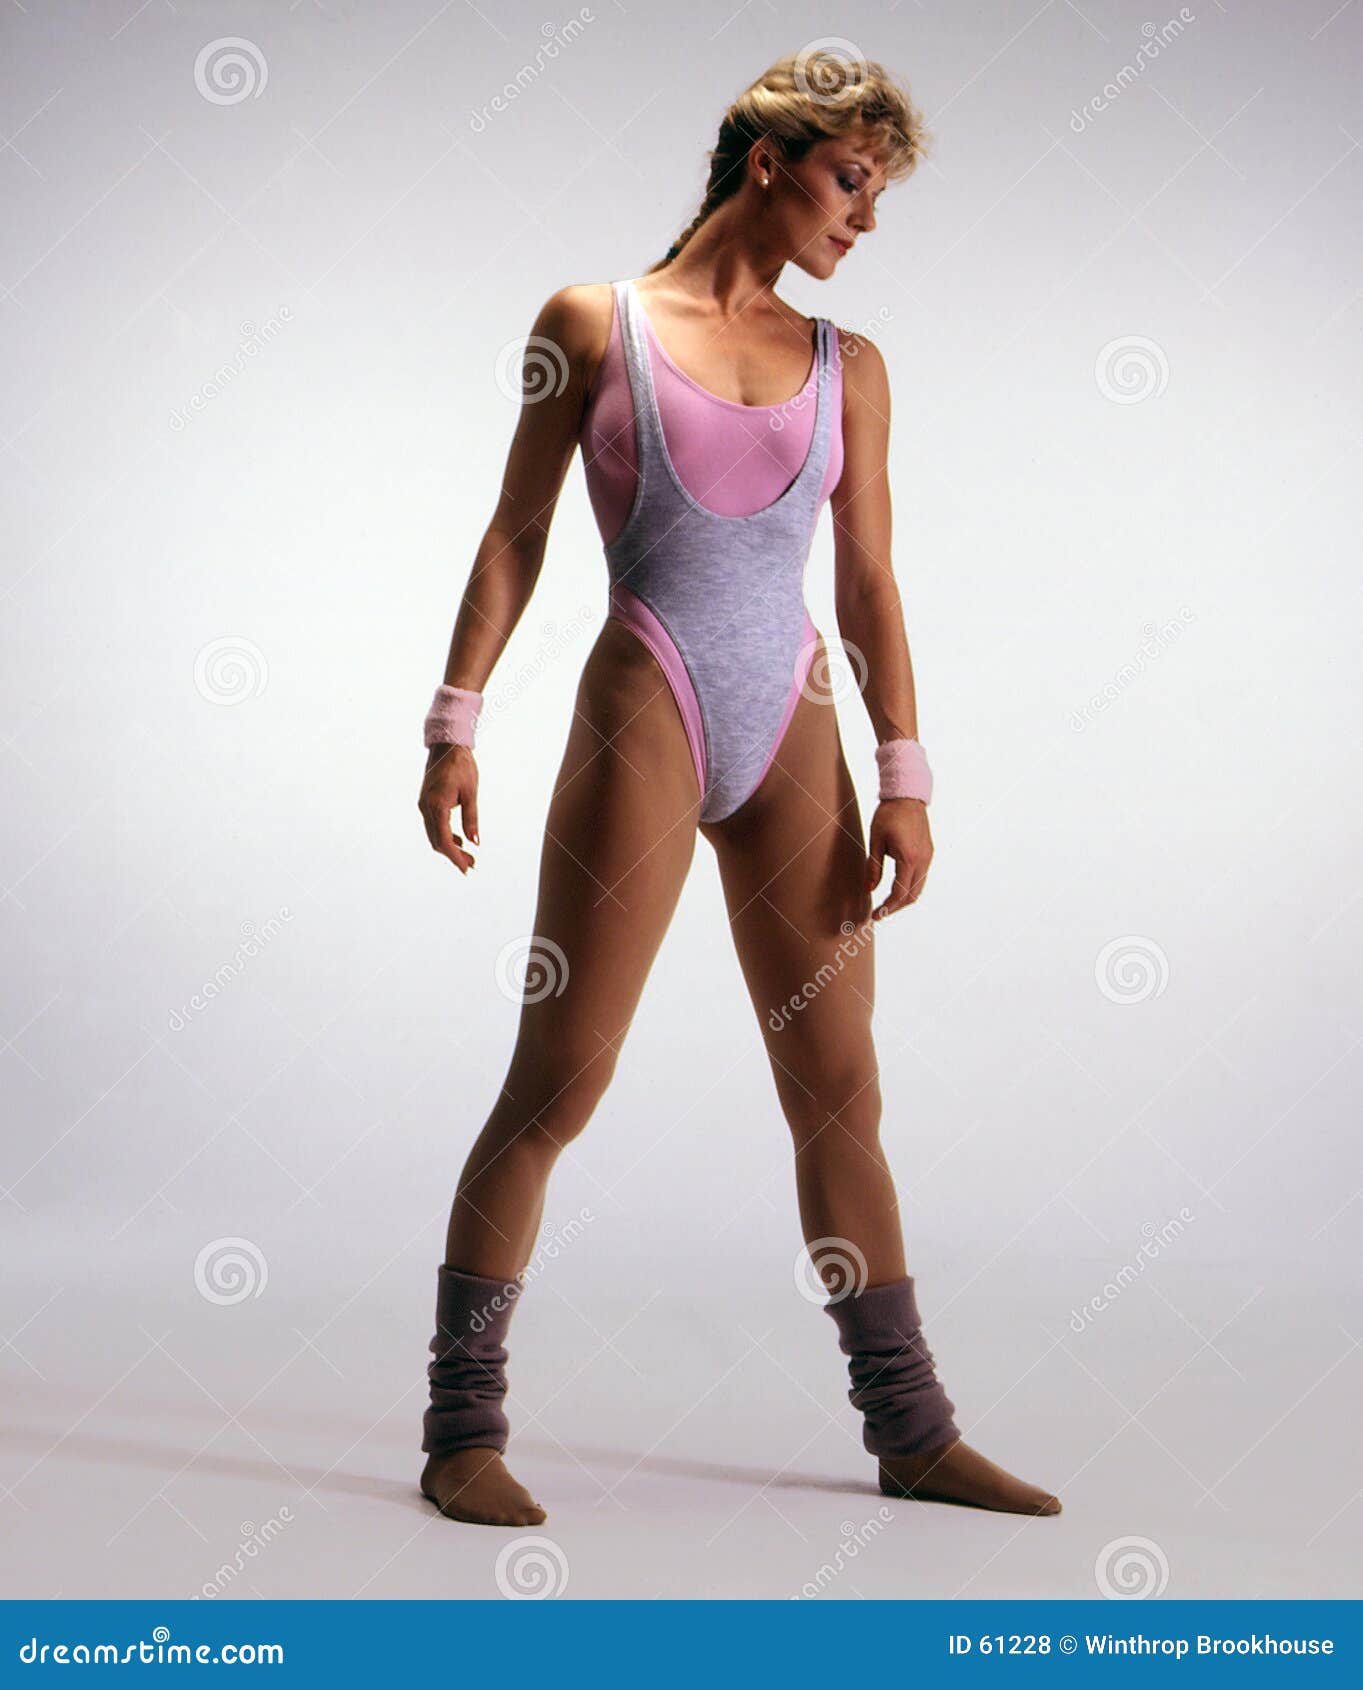 Woman in leotard stock photo. Image of background, physical - 61228